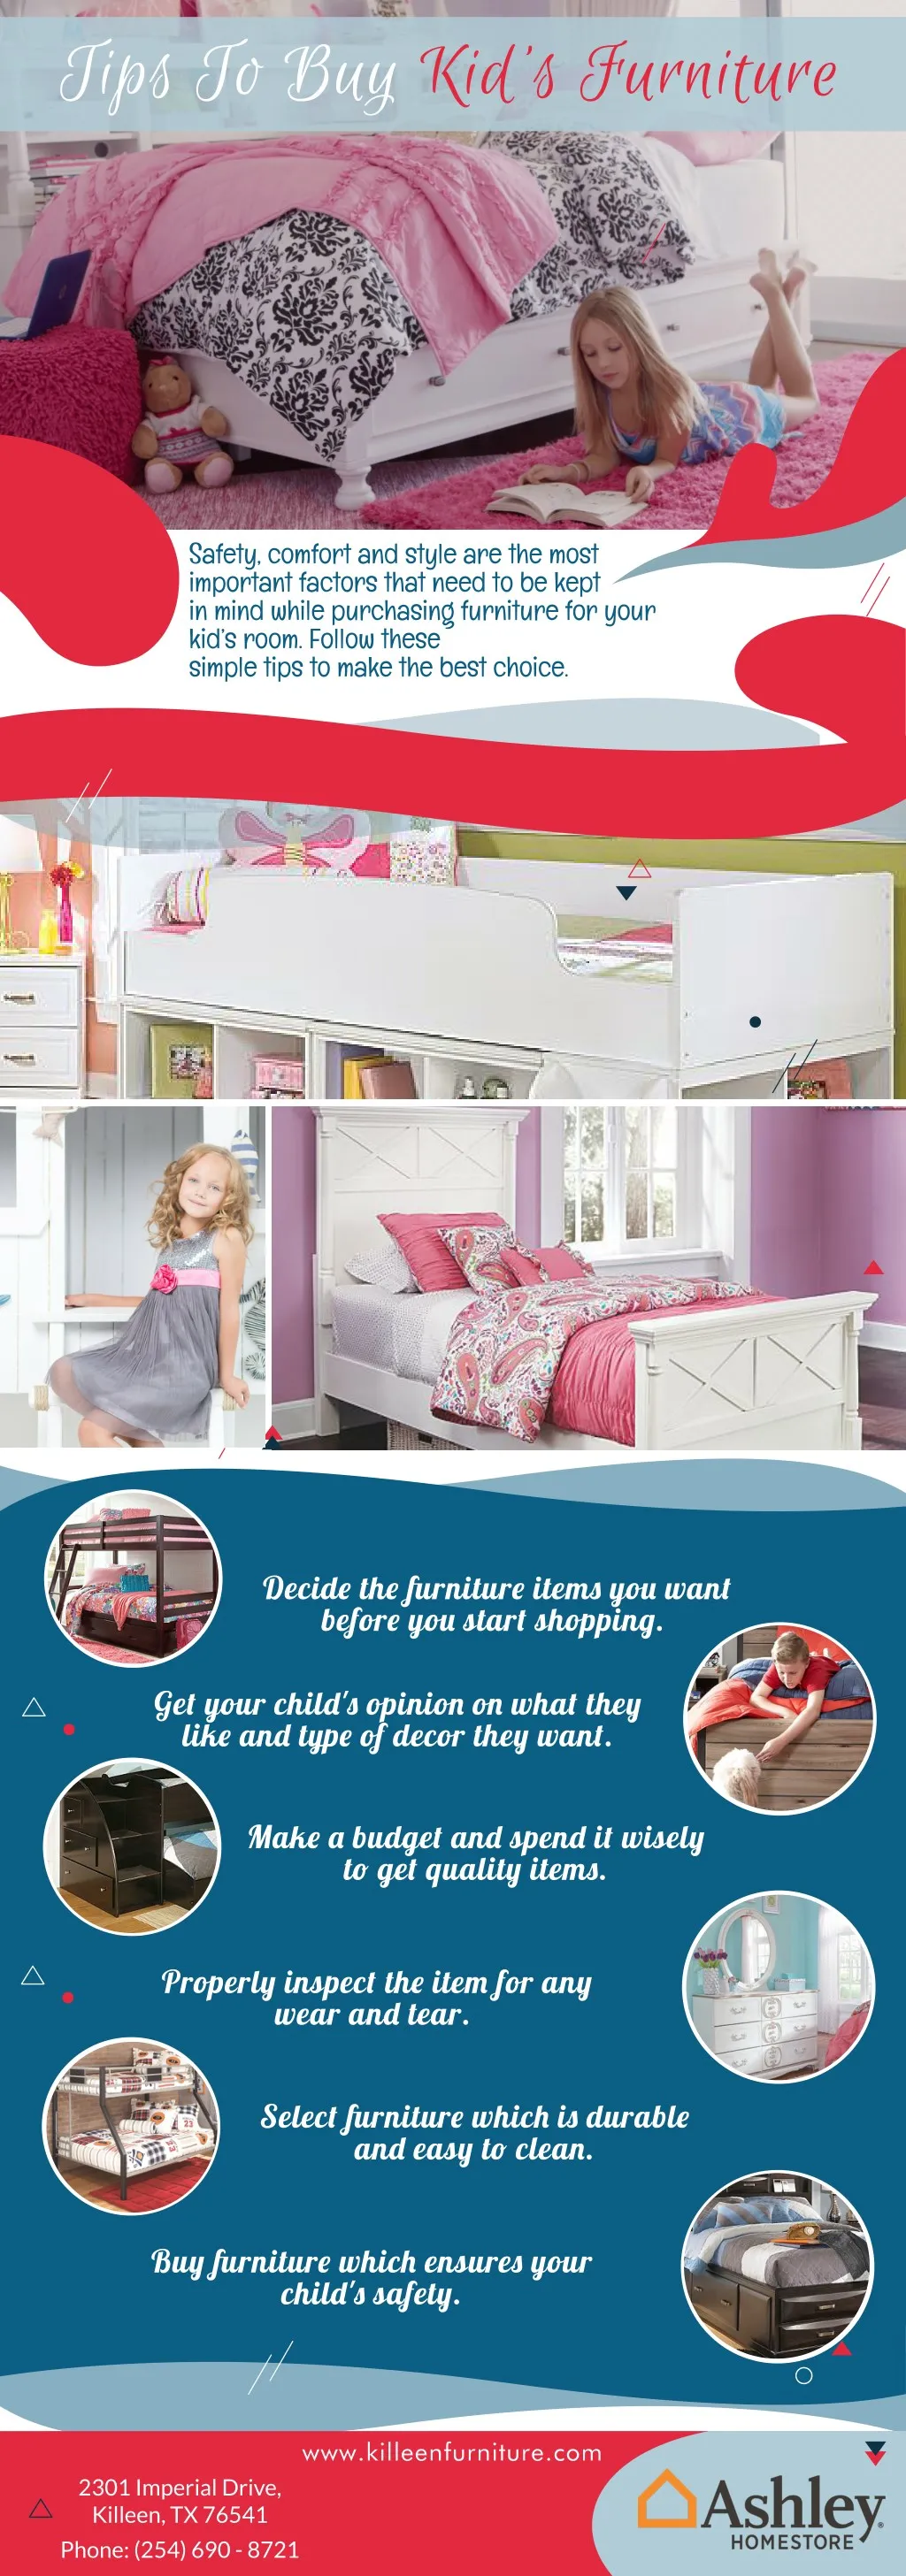 tips to buy kid s furniture